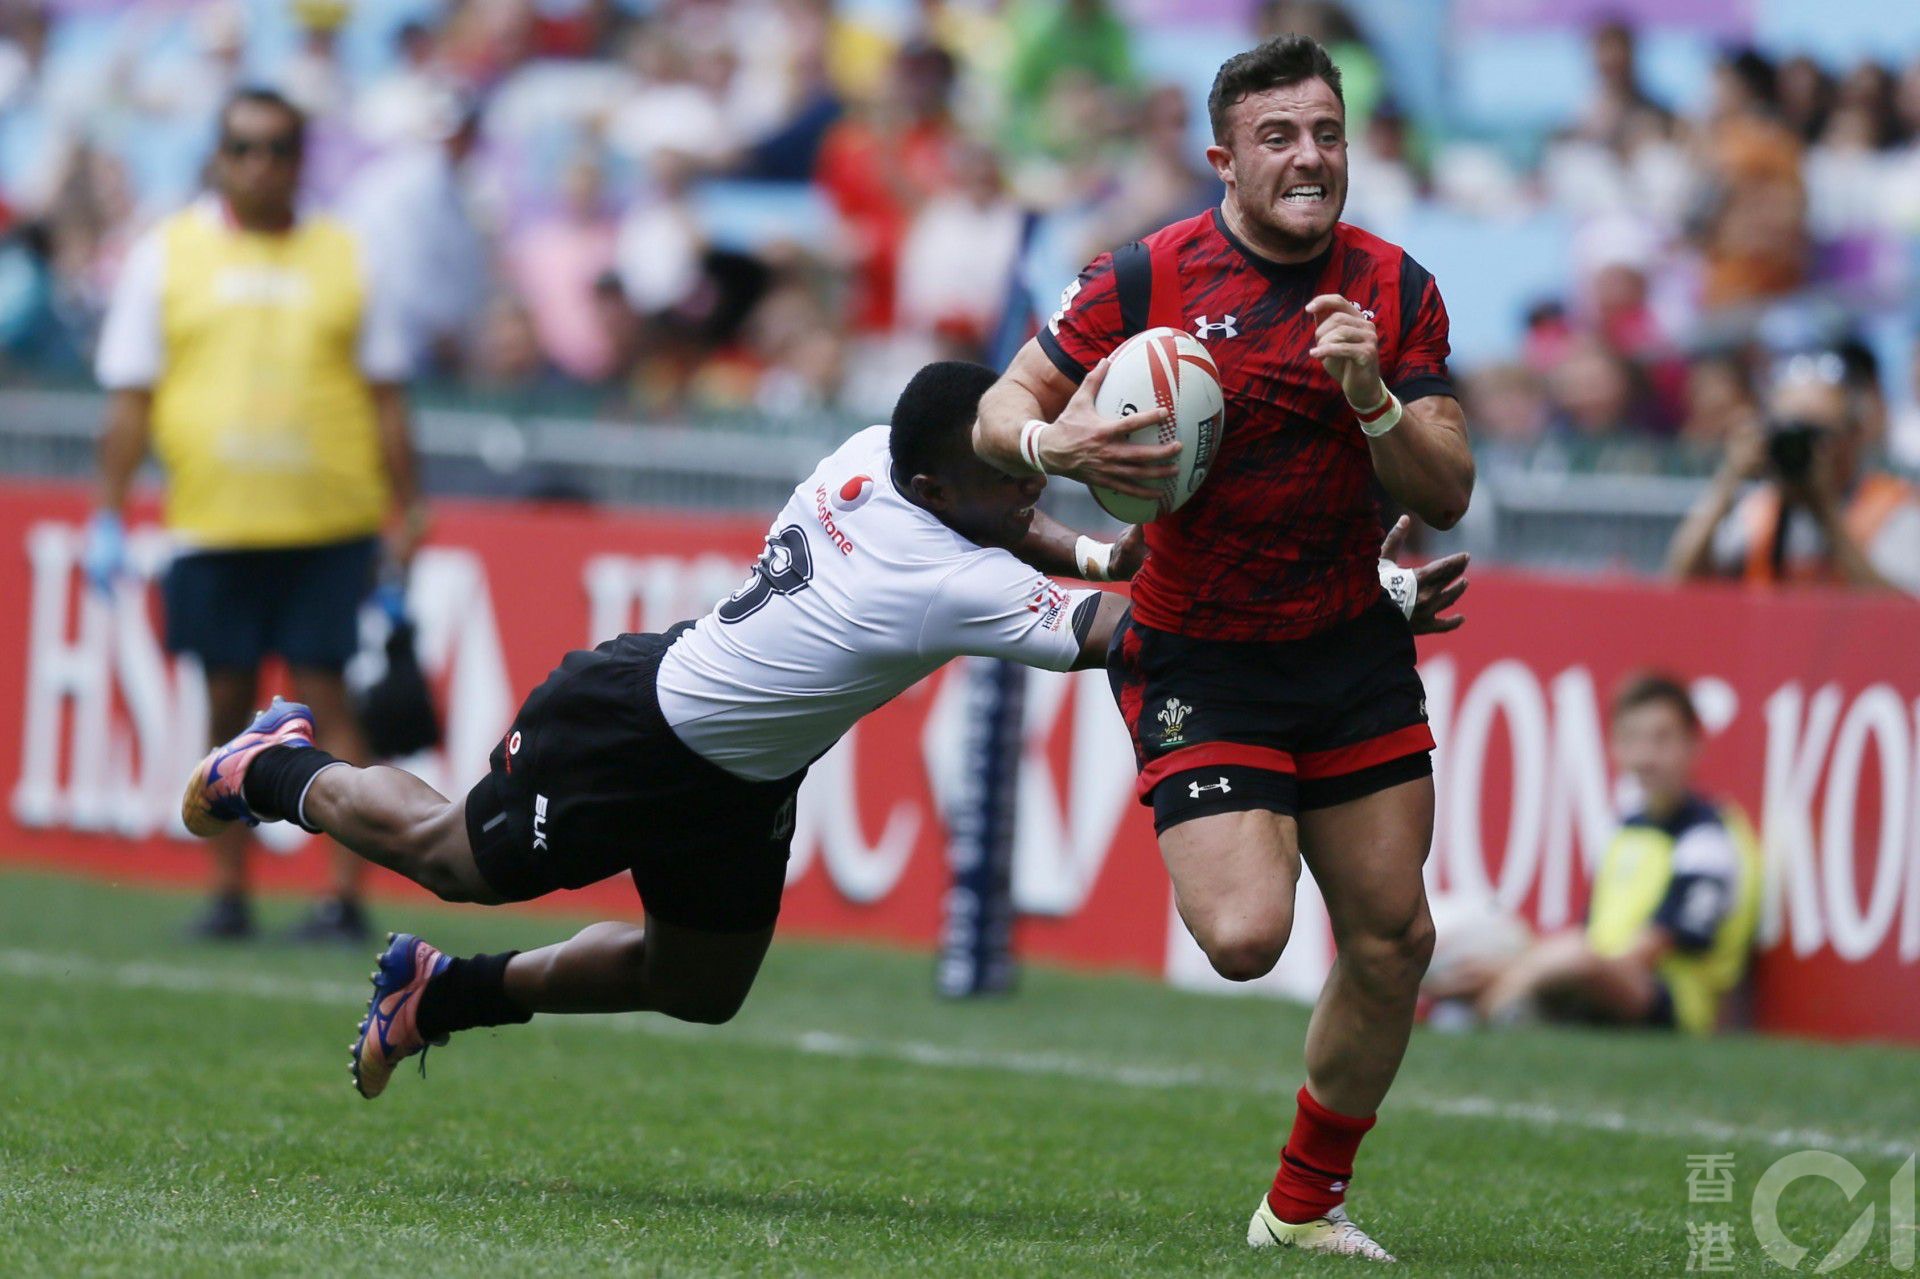 Rugby Sevens Tickets｜Adult 3-Day Pass official website still sells out